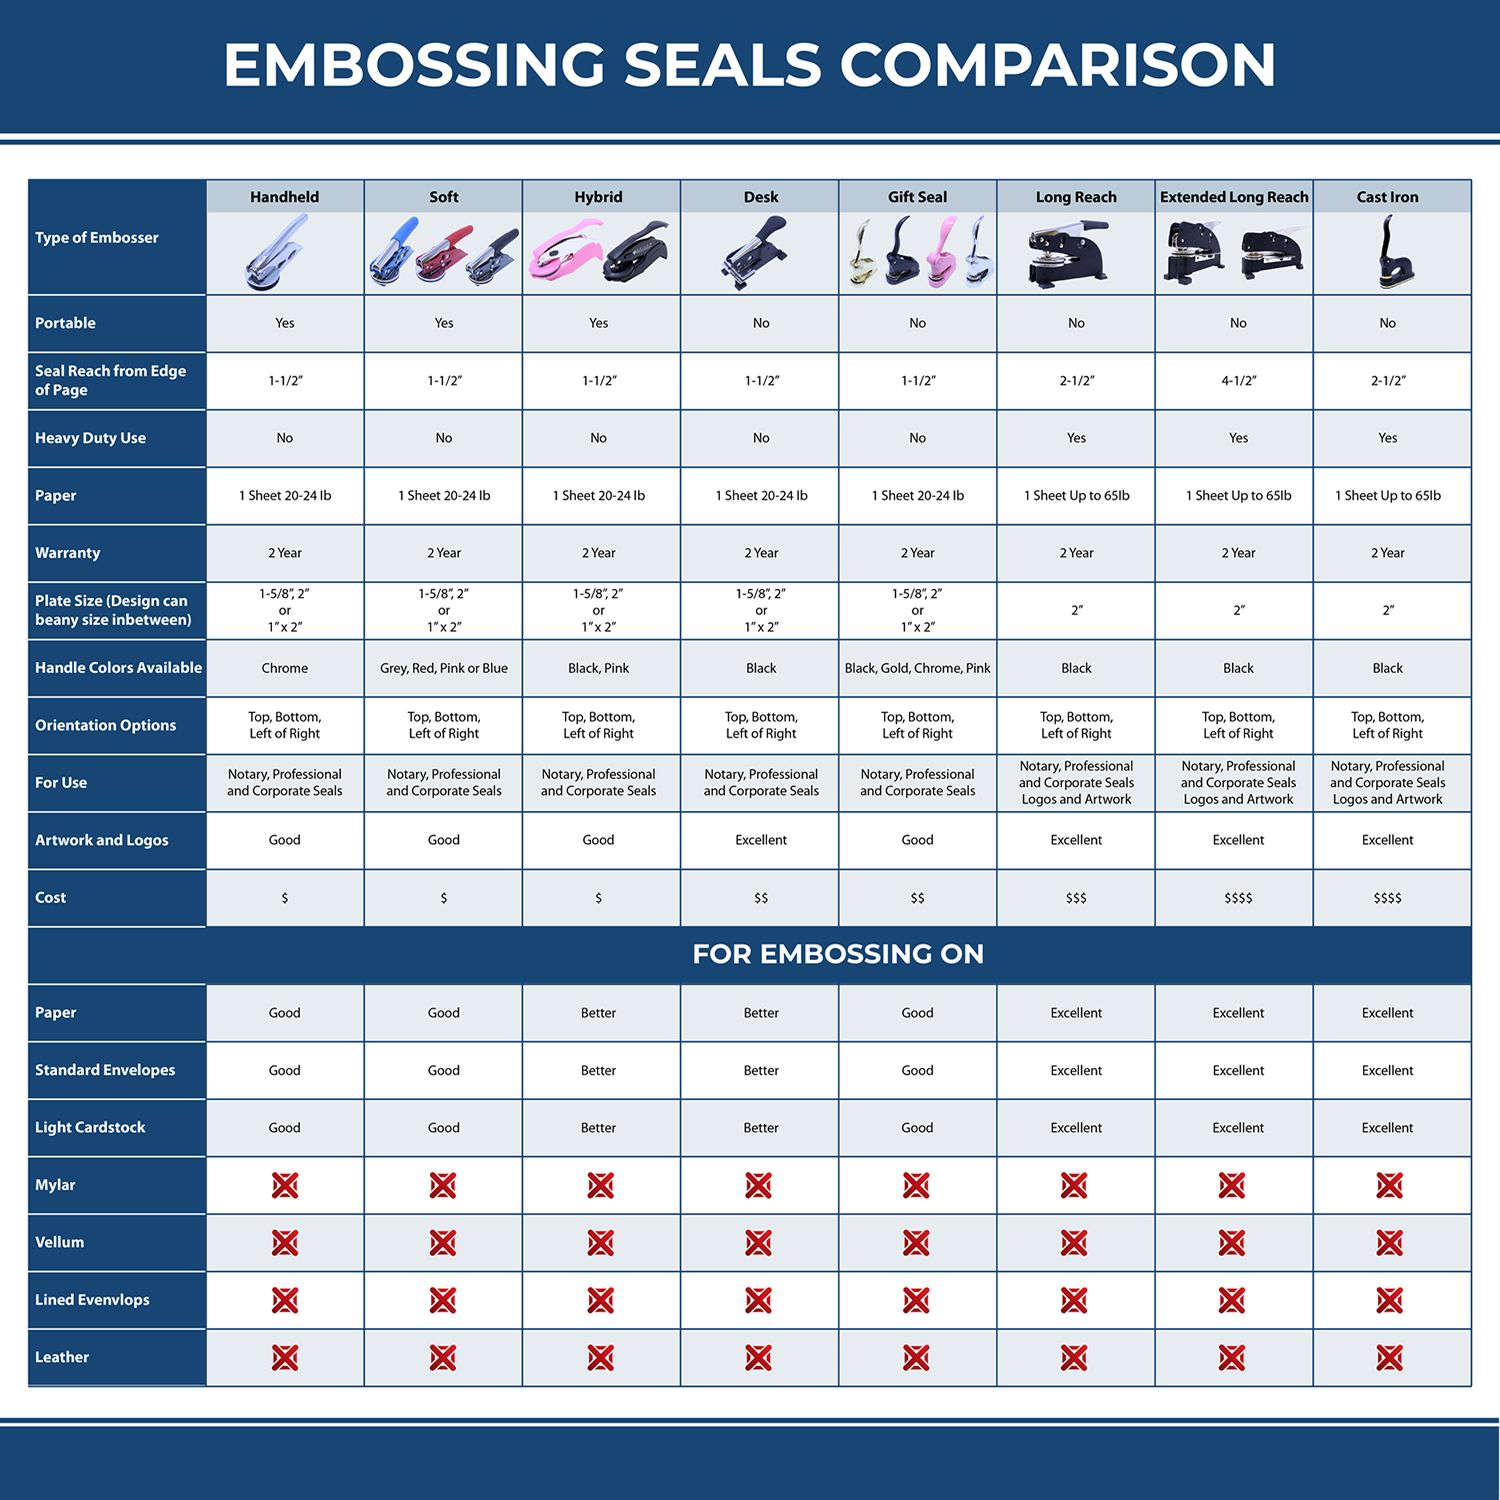 A comparison chart for the different types of mount models available for the Handheld Wisconsin Professional Engineer Embosser.